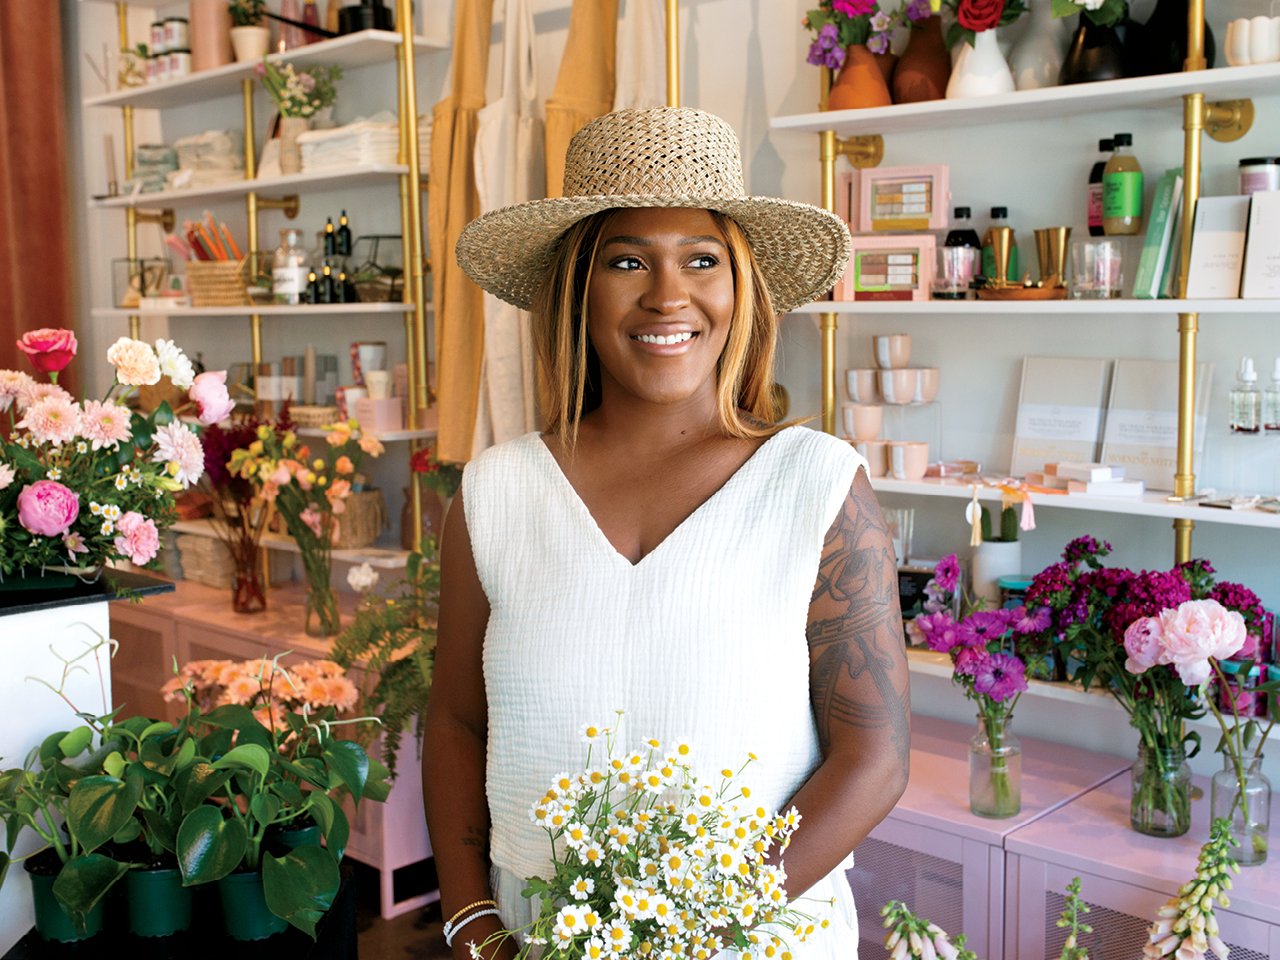 A photo of a woman in a white dress standing in a florist shop